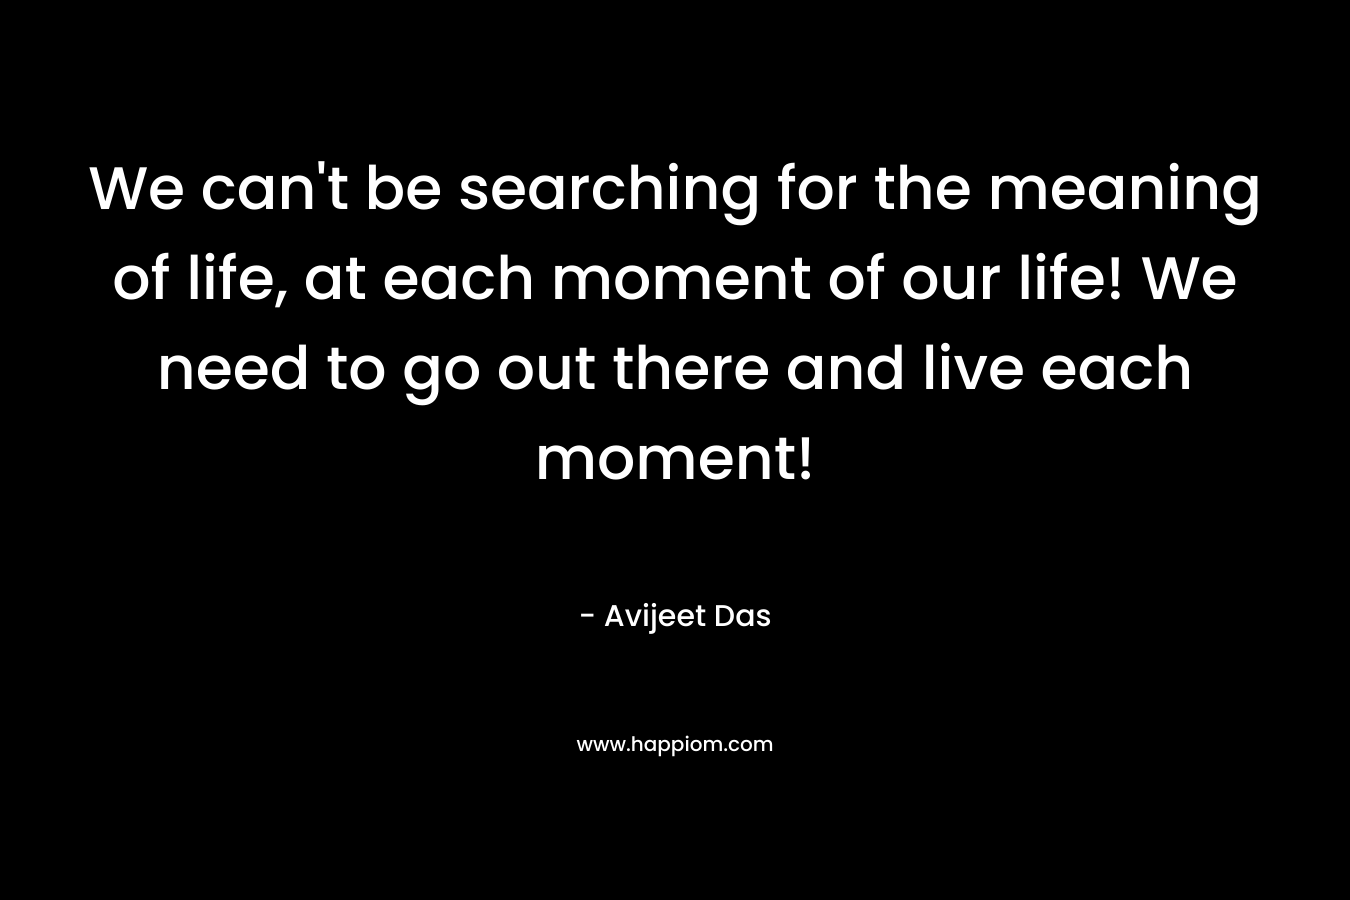 We can’t be searching for the meaning of life, at each moment of our life! We need to go out there and live each moment! – Avijeet Das